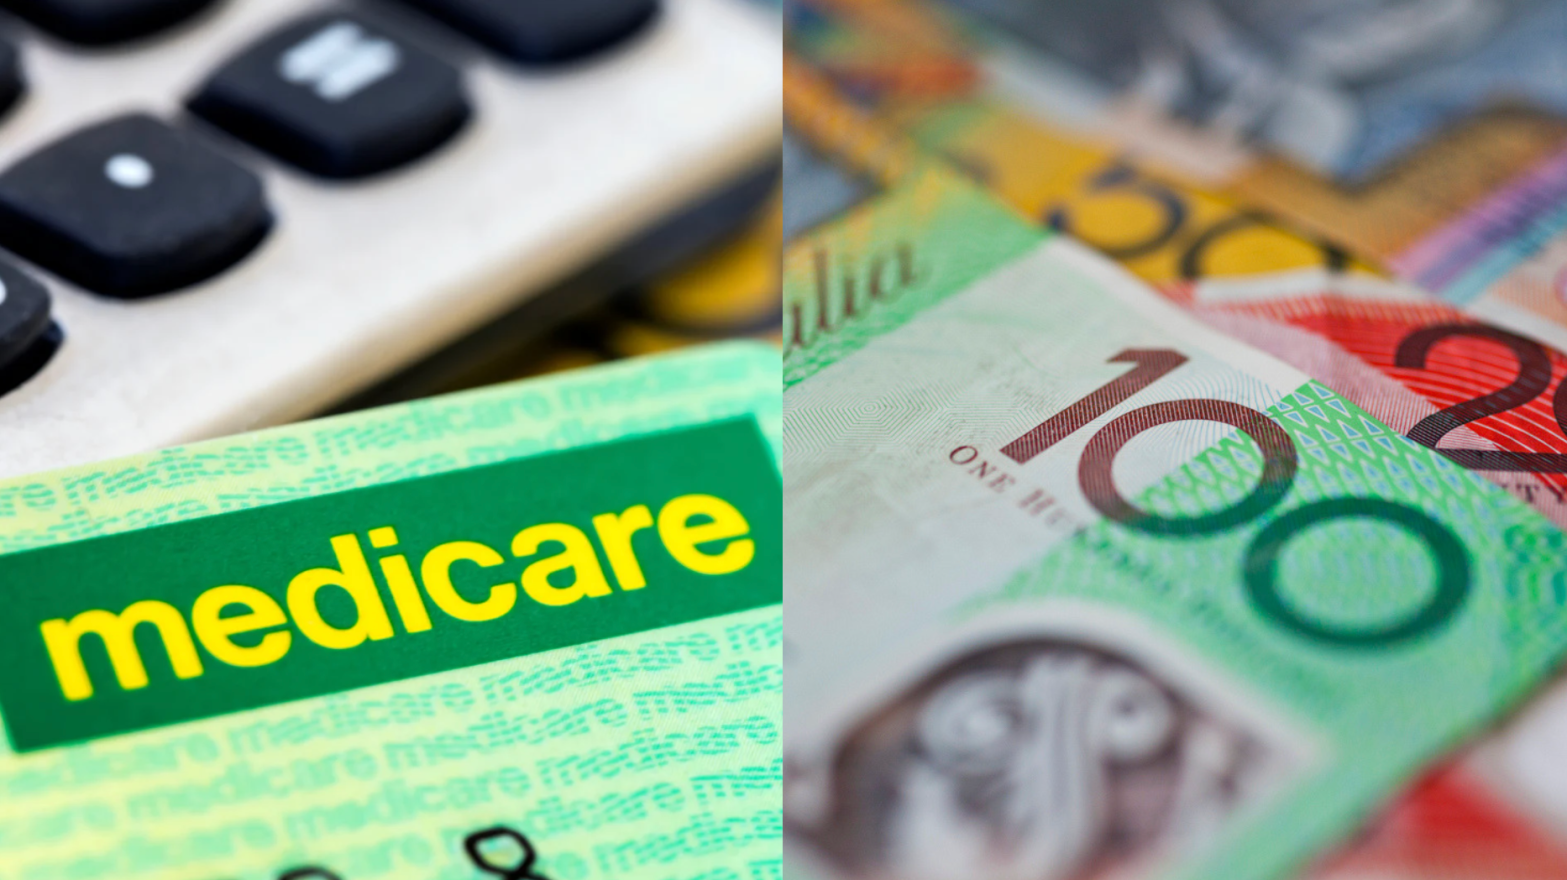 How to Tell if Your Medicare Details Have Been Set Up Correctly